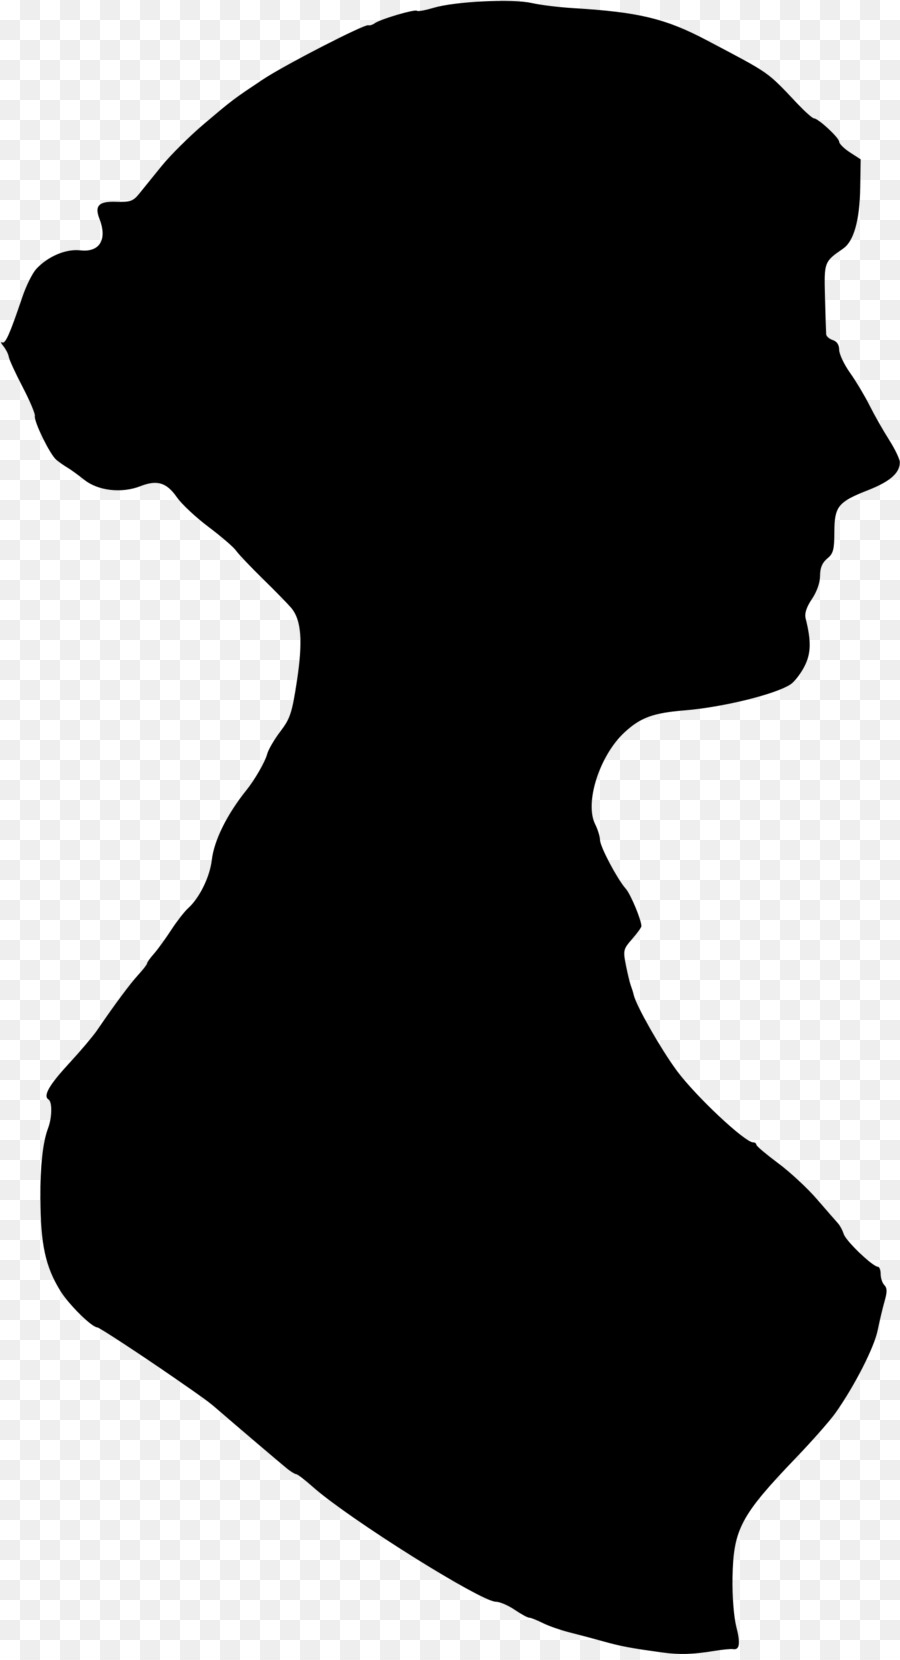 Pride and Prejudice Silhouette Portrait Mansfield Park Image - identity theft png silhouette png download - 1617*2971 - Free Transparent Pride And Prejudice png Download.